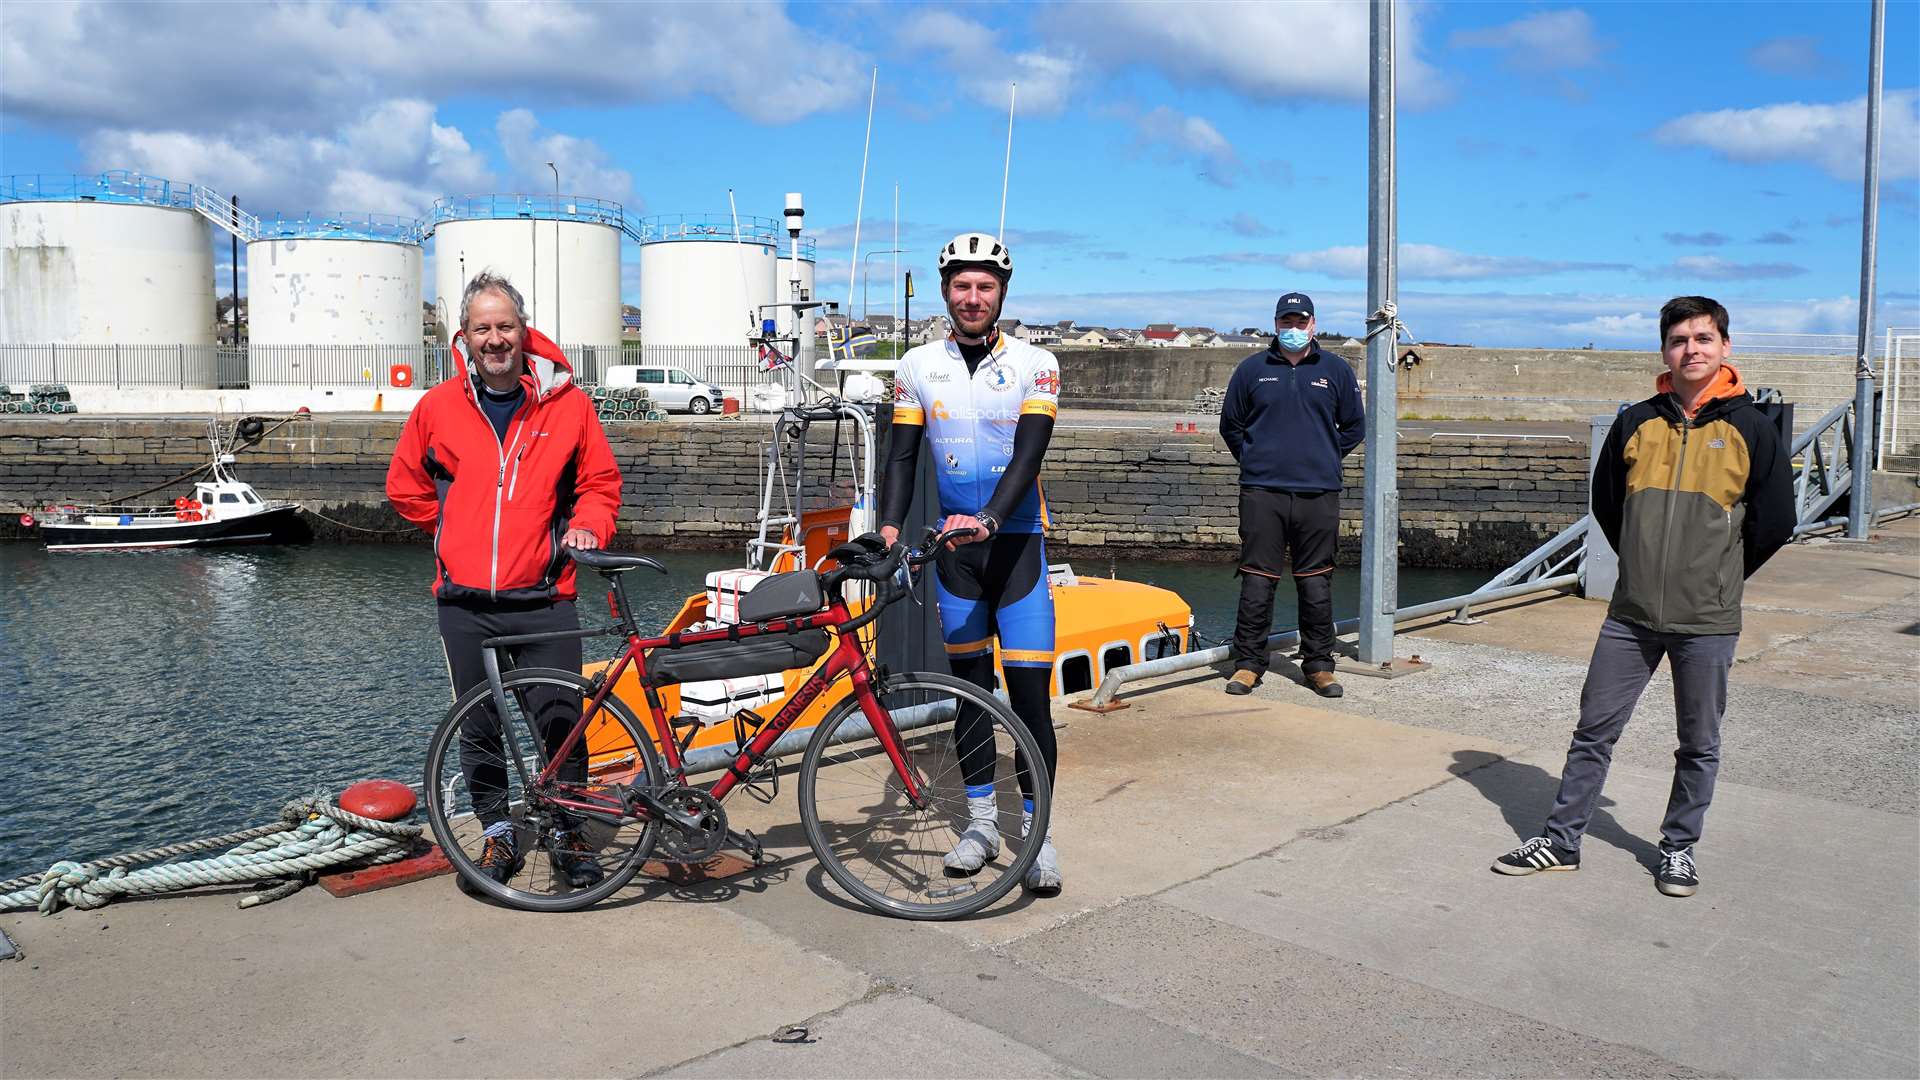 Harry at Wick harbour on May 24. From left, trip sponsor Professor Iain Baikie, cyclist Harry Lidgley, Wick lifeboat mechanic Johnny Grant representing the rest of the crew and Professor Baikie's son Joni who knew Harry from Cambridge University. Picture: DGS